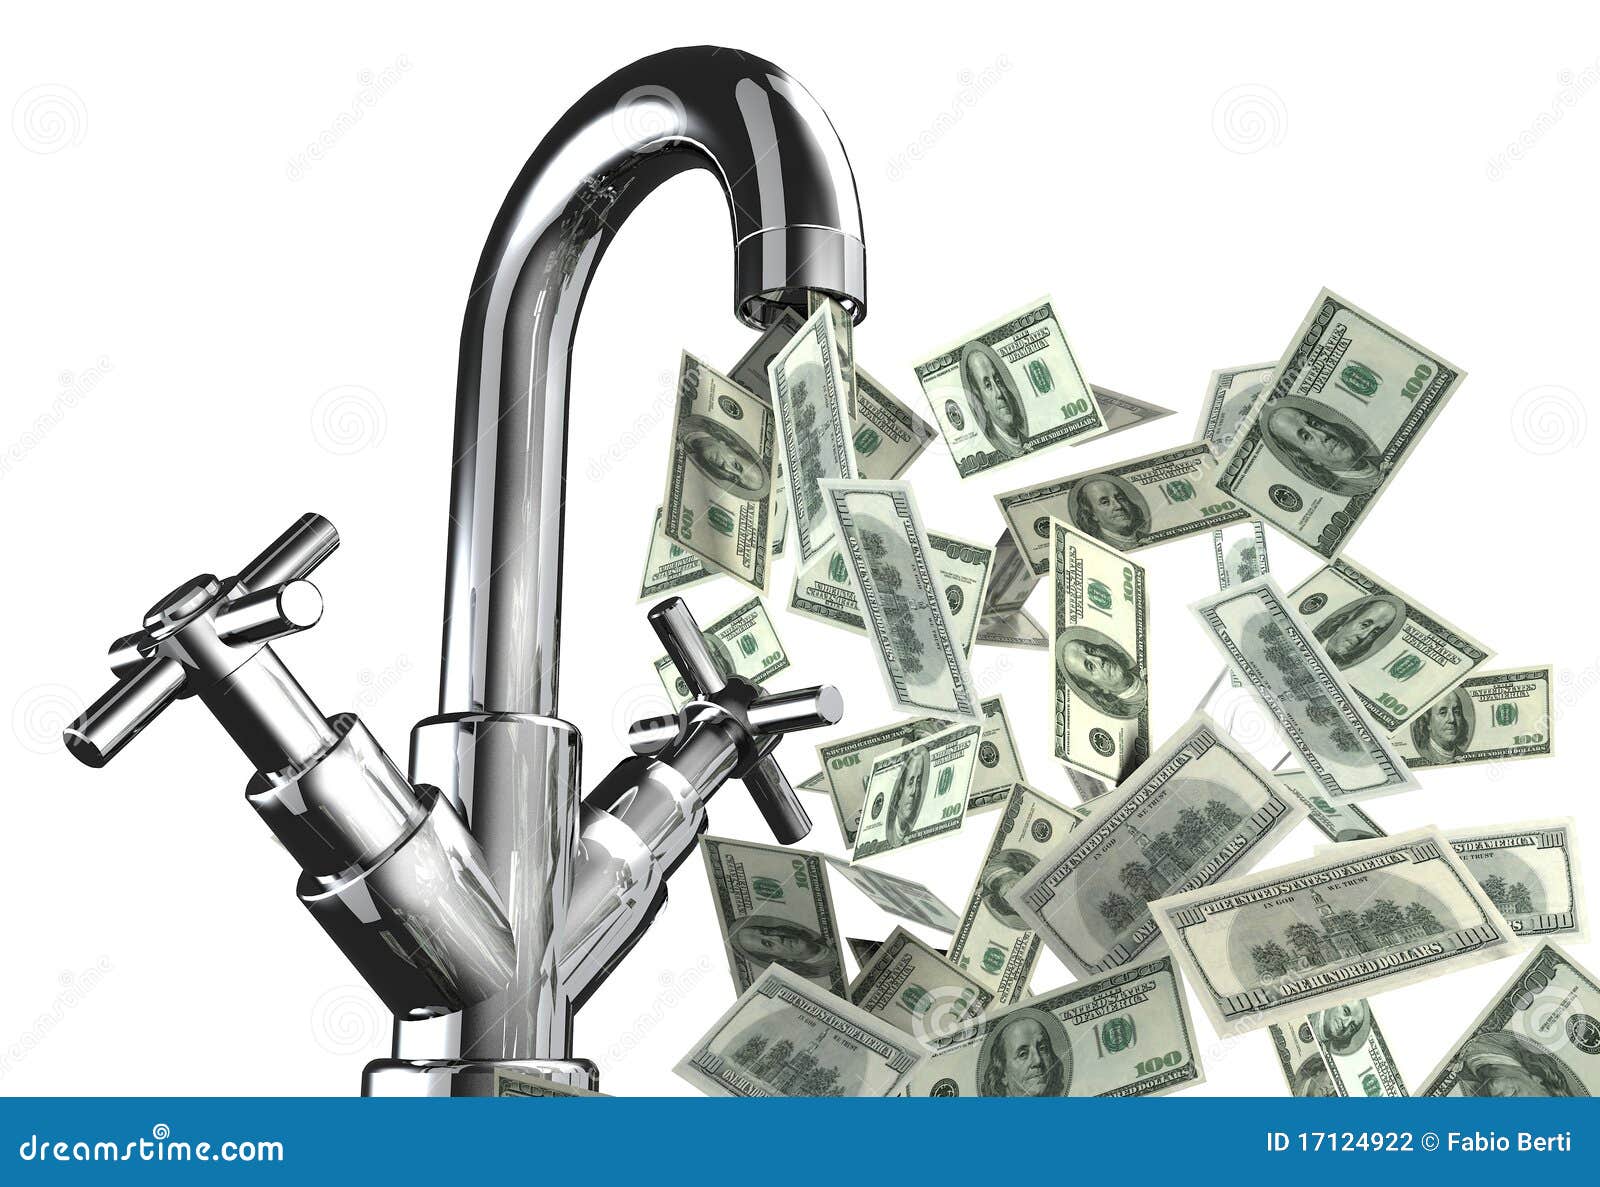 tap water with u.s. dollar banknotes